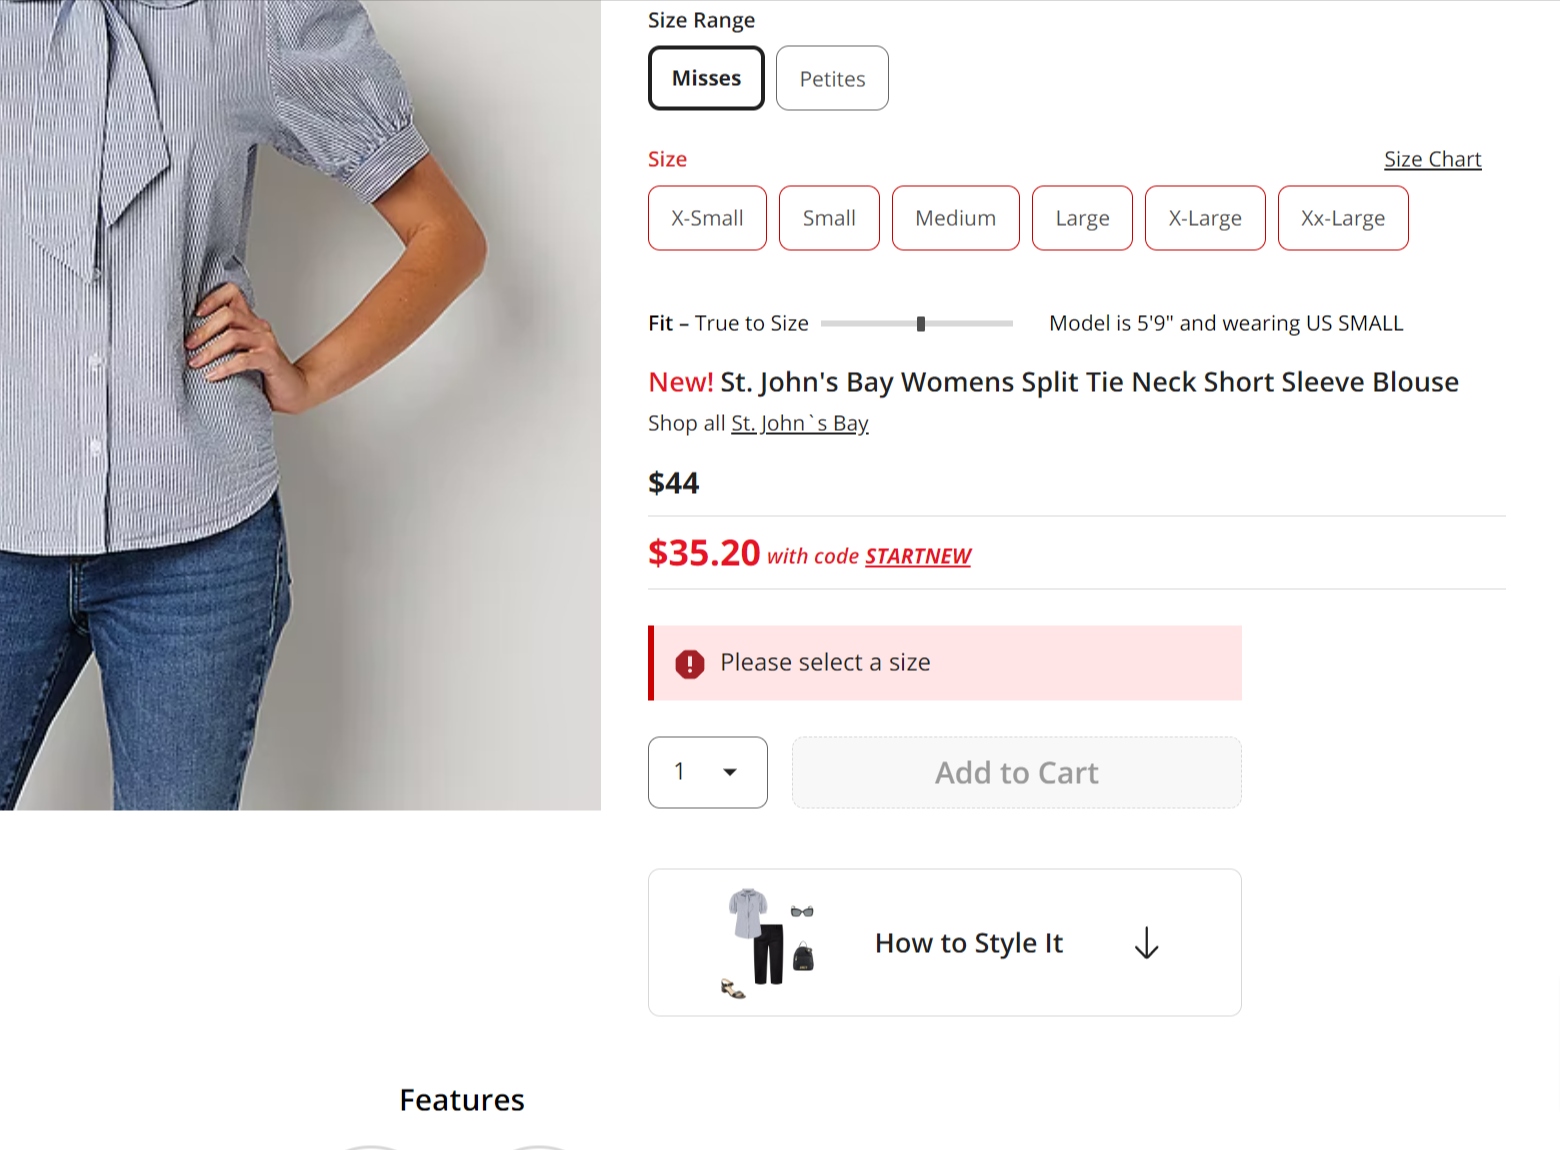 9 eCommerce Website Issues Impacting User Experience